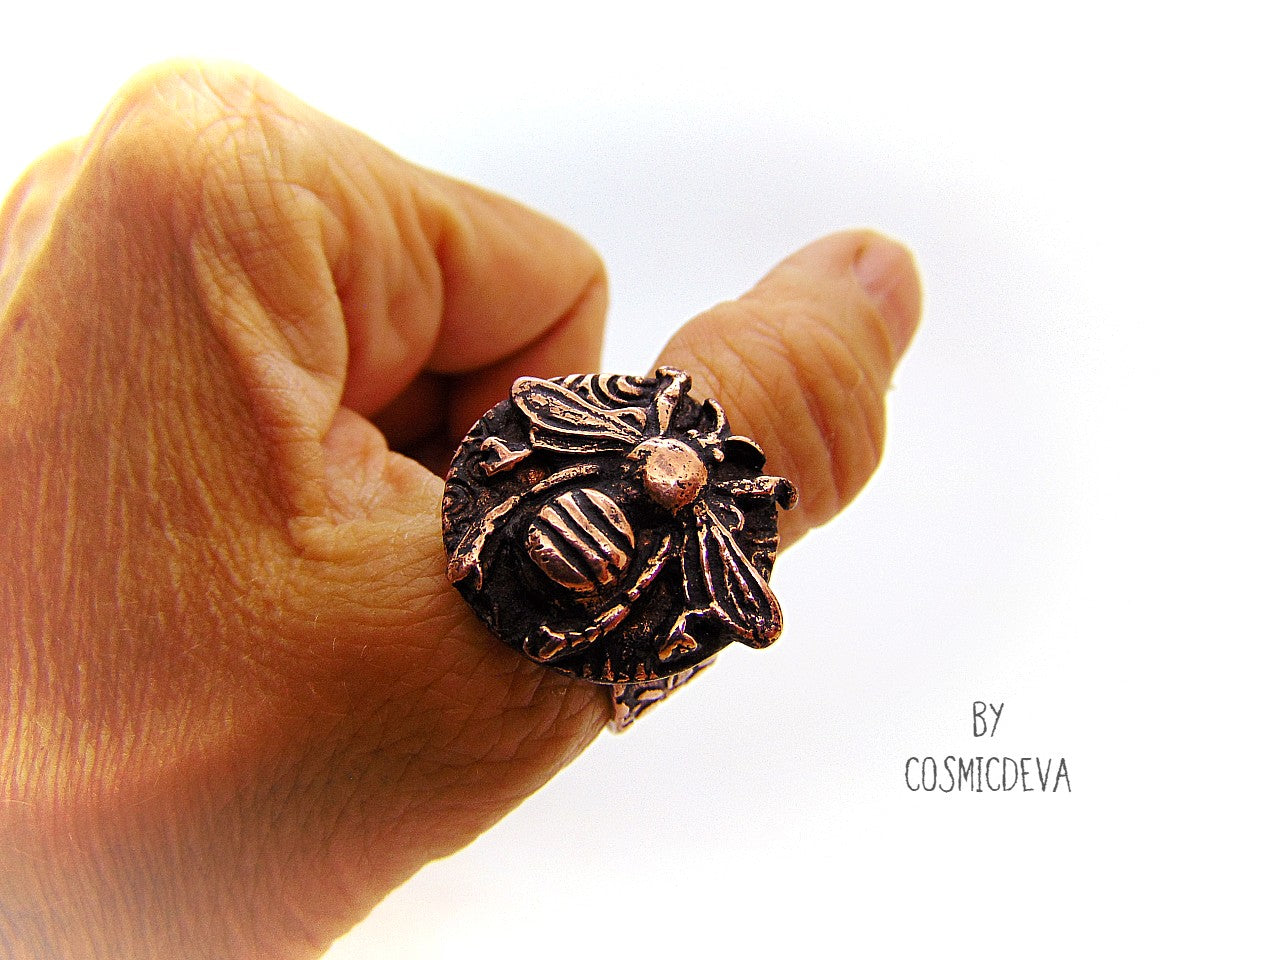 Handmade queen bee goddess, honey bee ring made of solid copper. The ring shank has a beautiful texture and has the cosmicdeva logo inside.